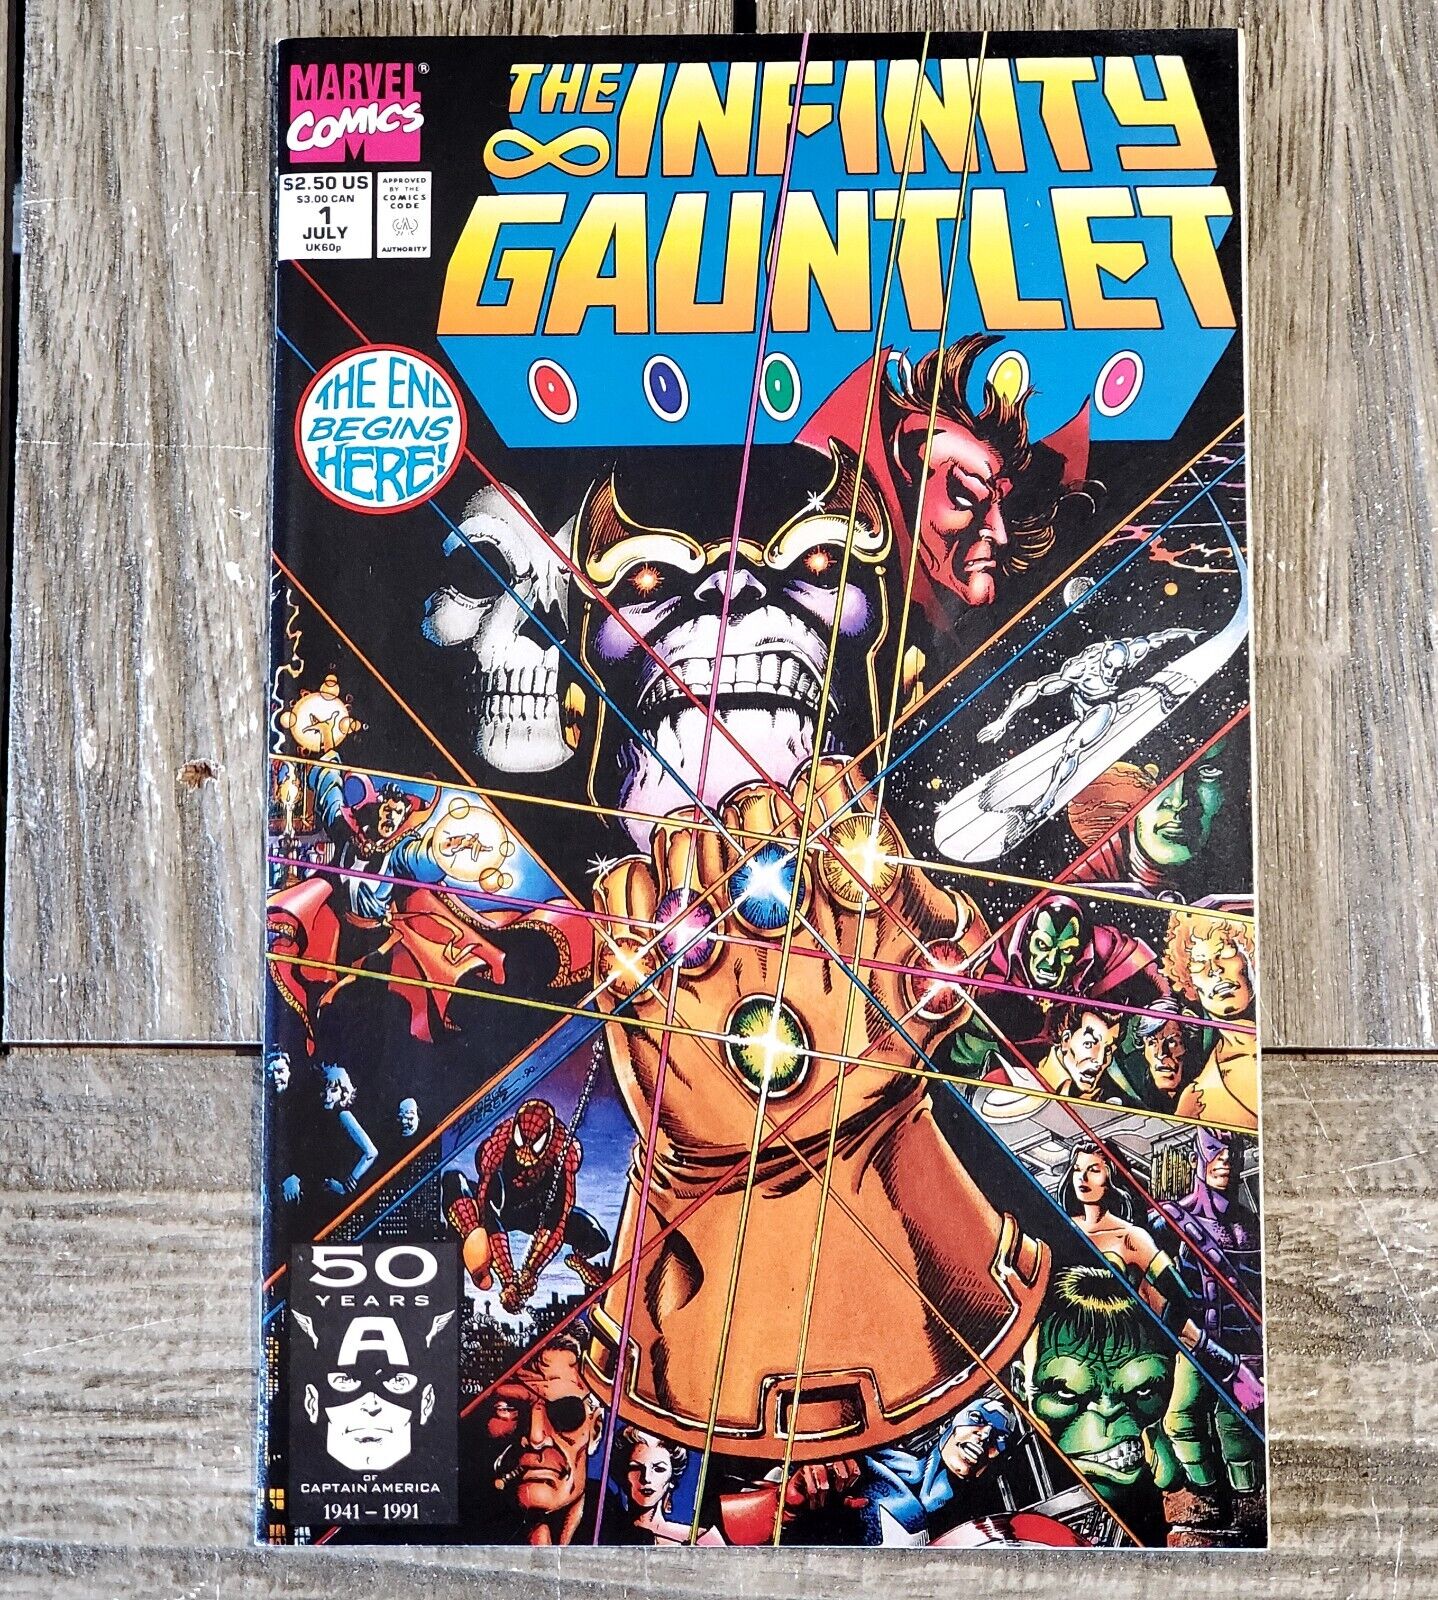 The Infinity Gauntlet #1 by Jim Starlin 1991 Marvel Comics Thanos